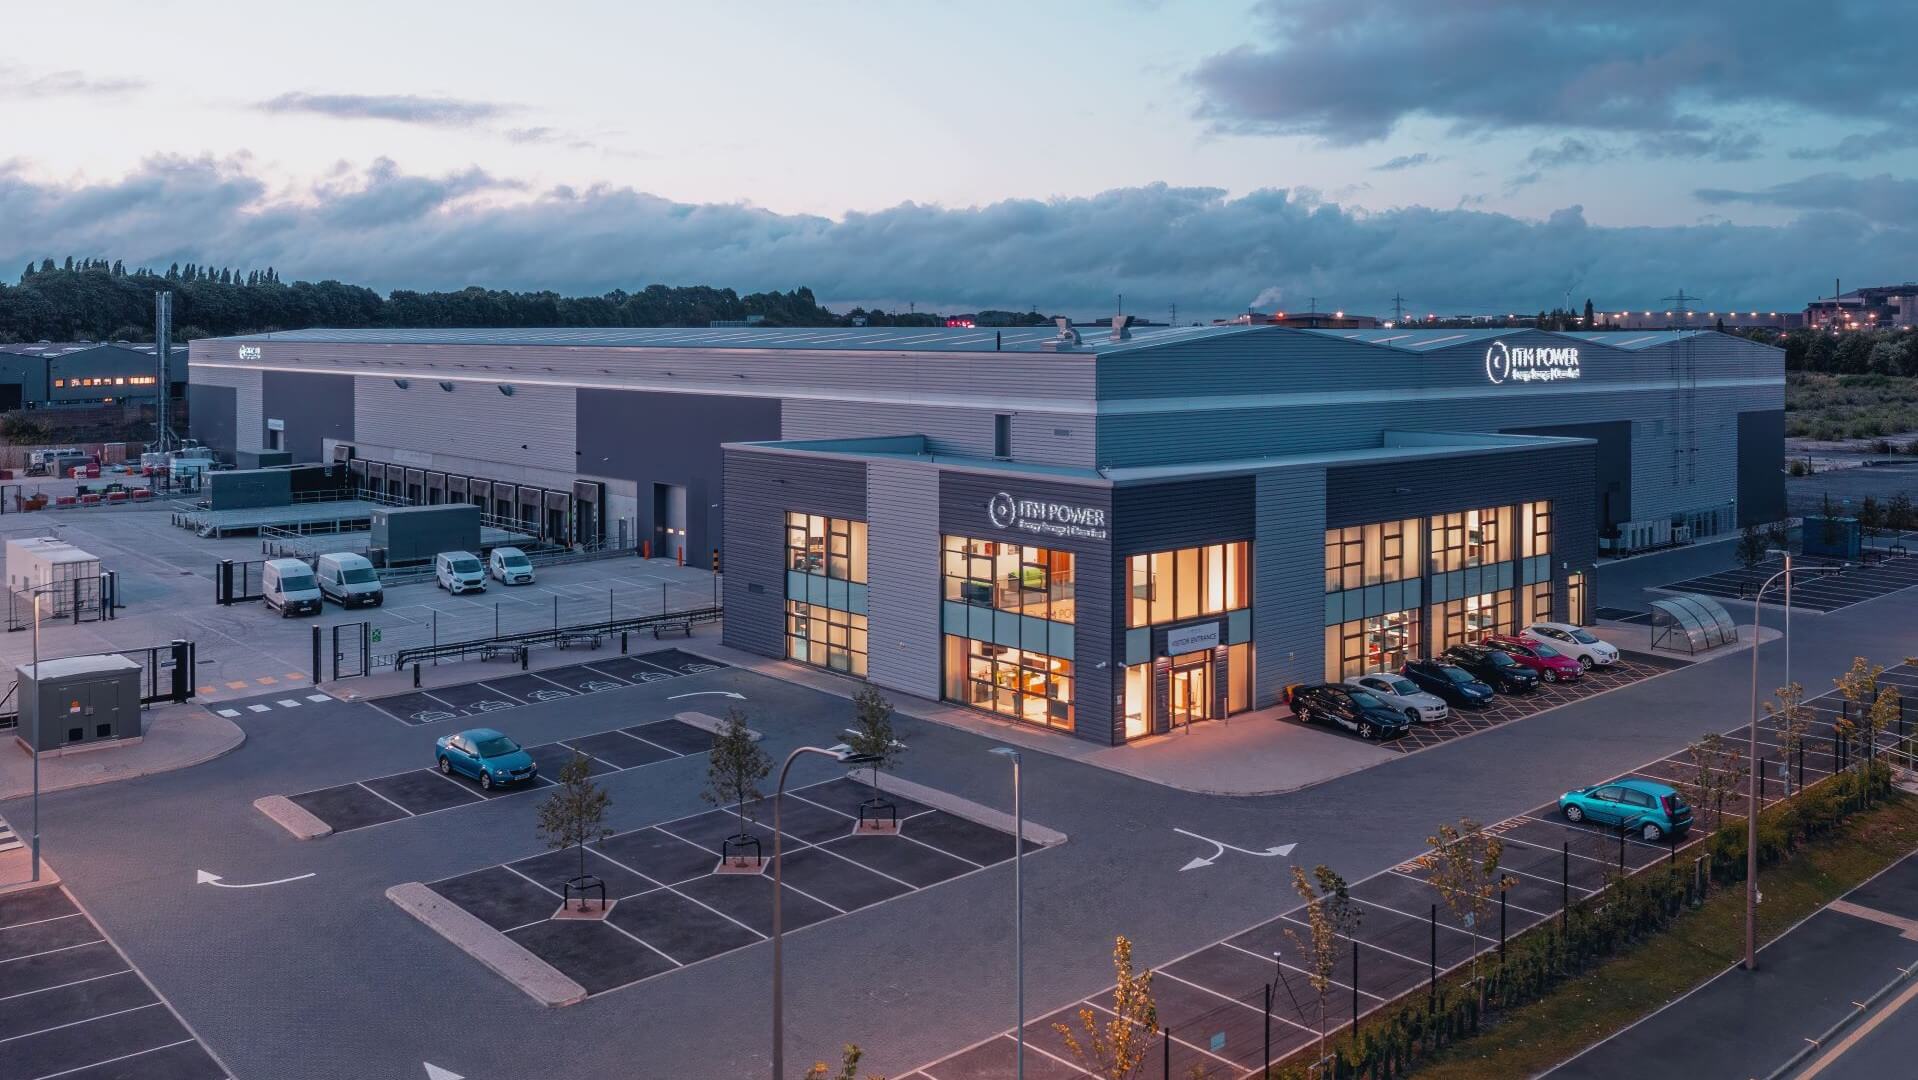 Aerial view of the exterior of ITM Power’s new ‘Gigafactory’ electrolyser manufacturing facility in Sheffield